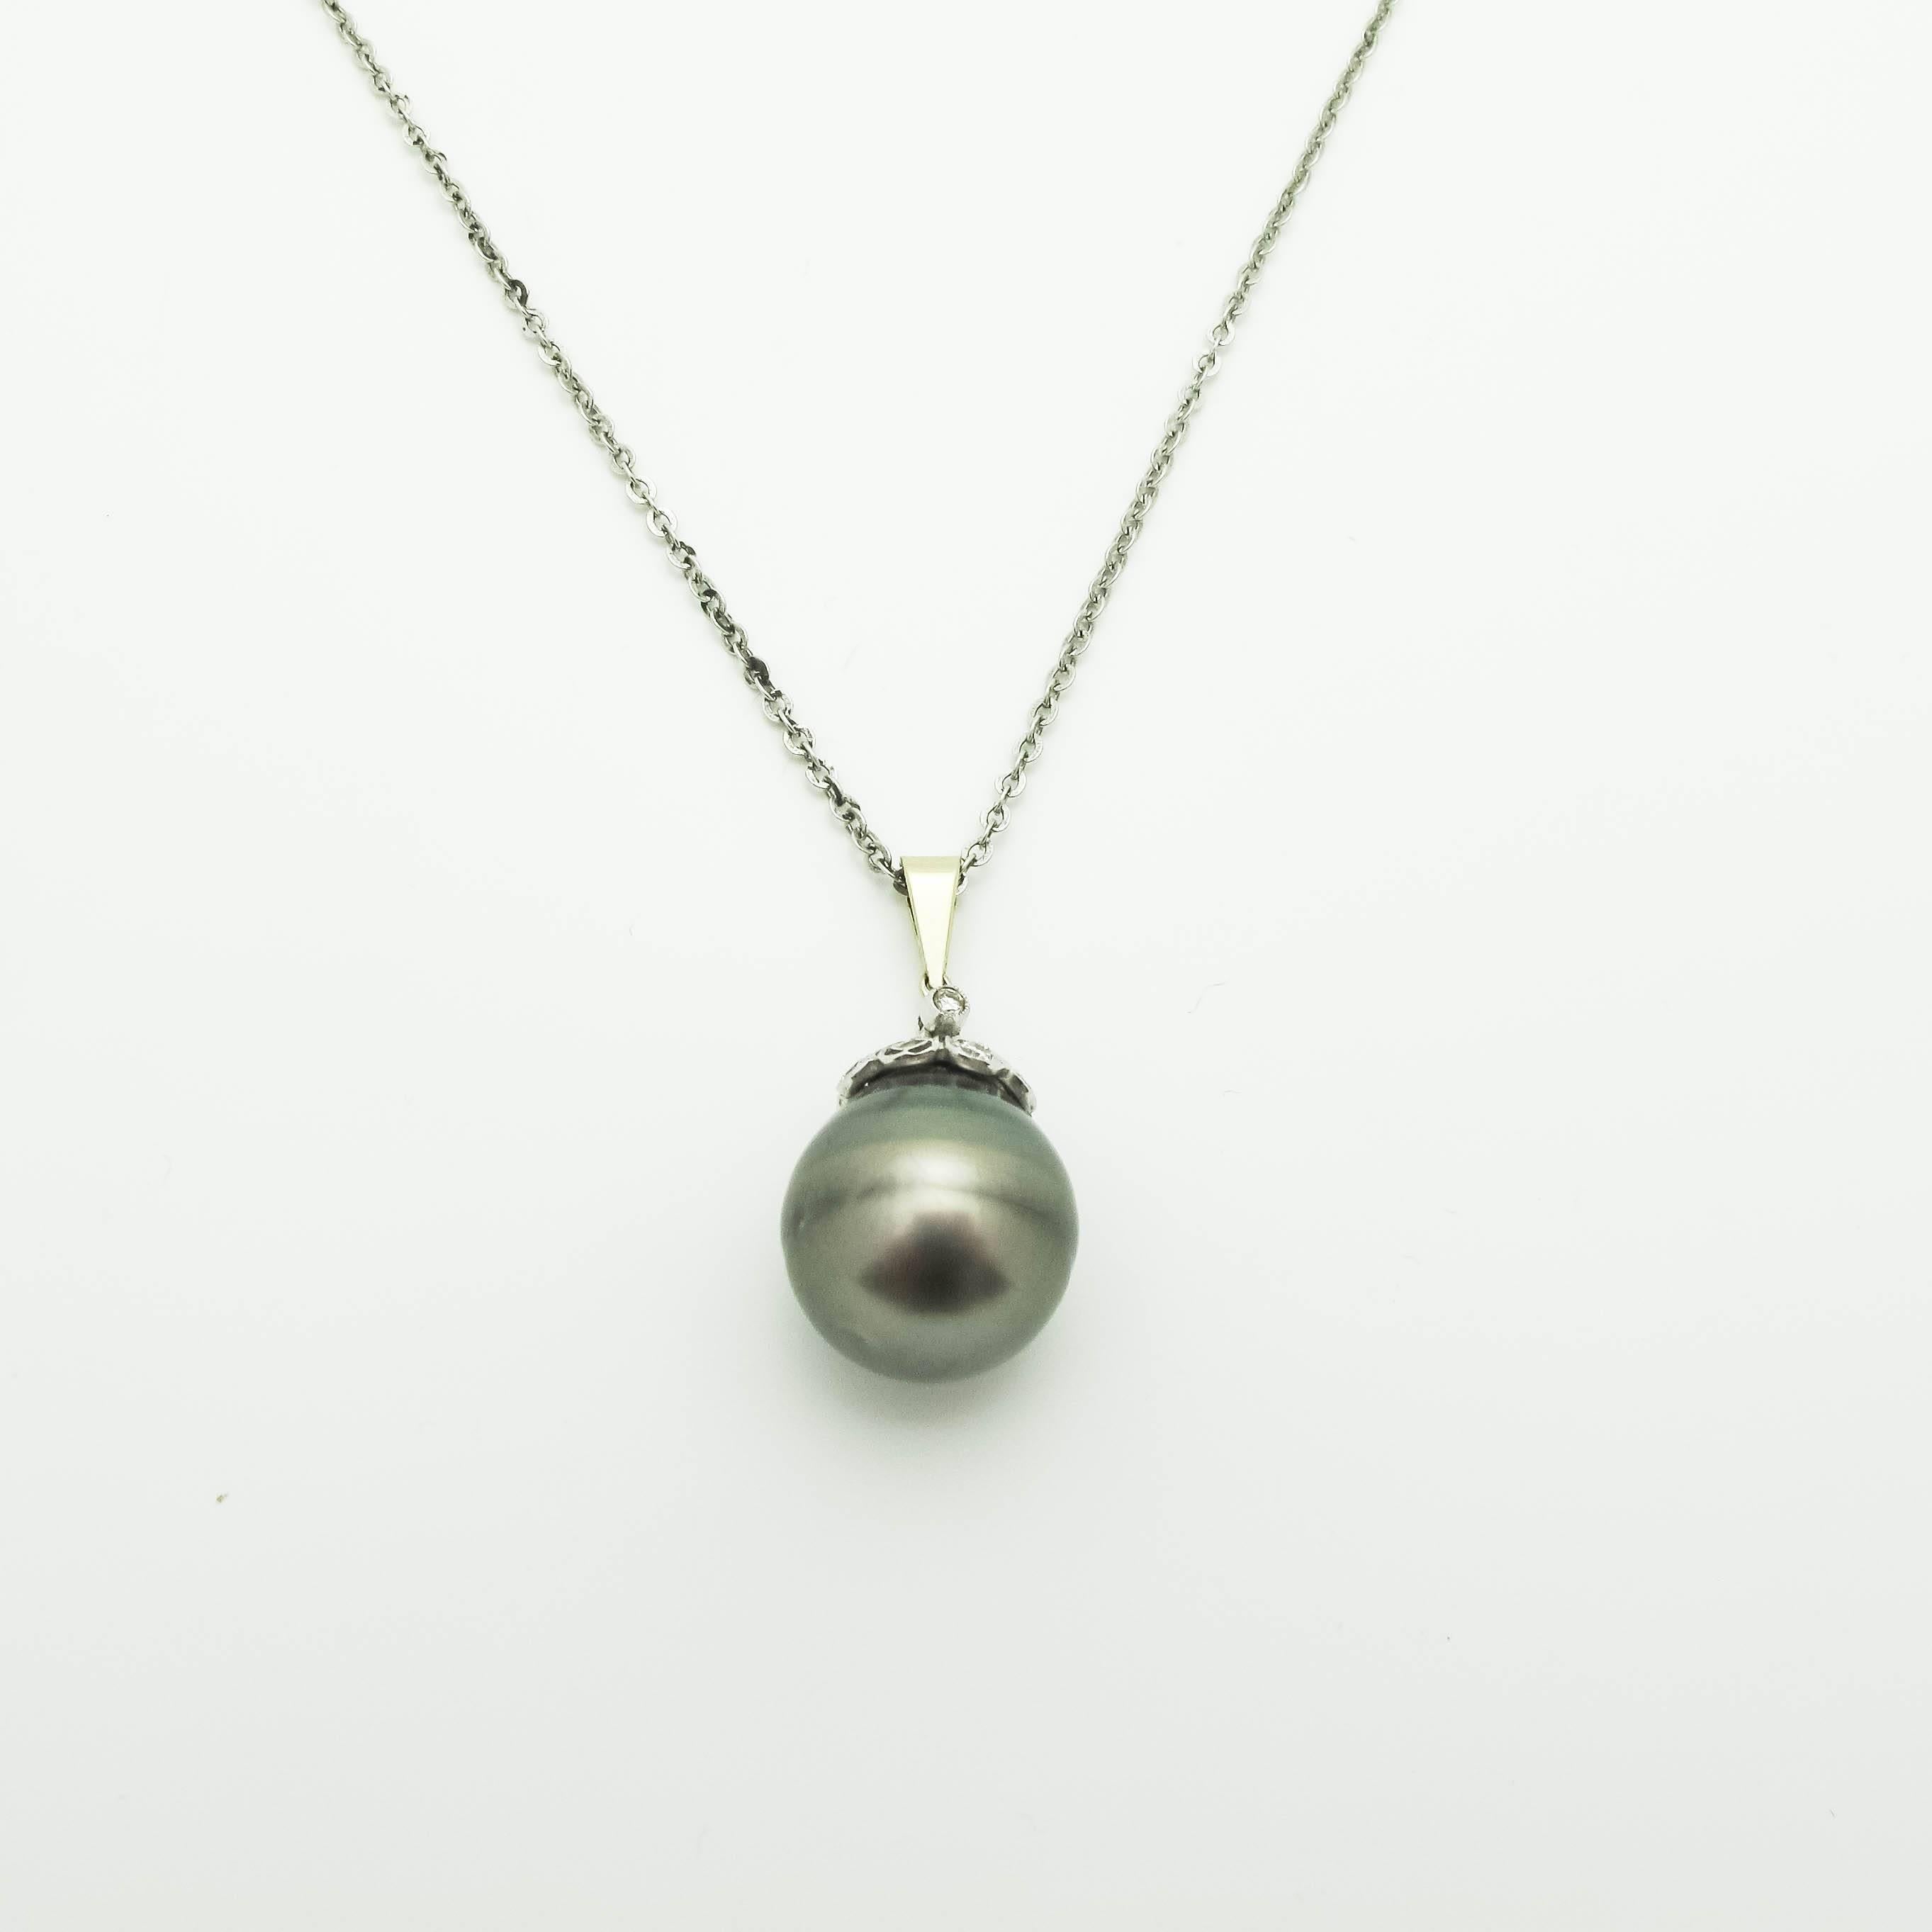 This black pearl pendant has a diamond and white gold Pave flower cap and is absolutely stunning. Greys and various shades of greens all work together to reflect whatever you are wearing. The 16